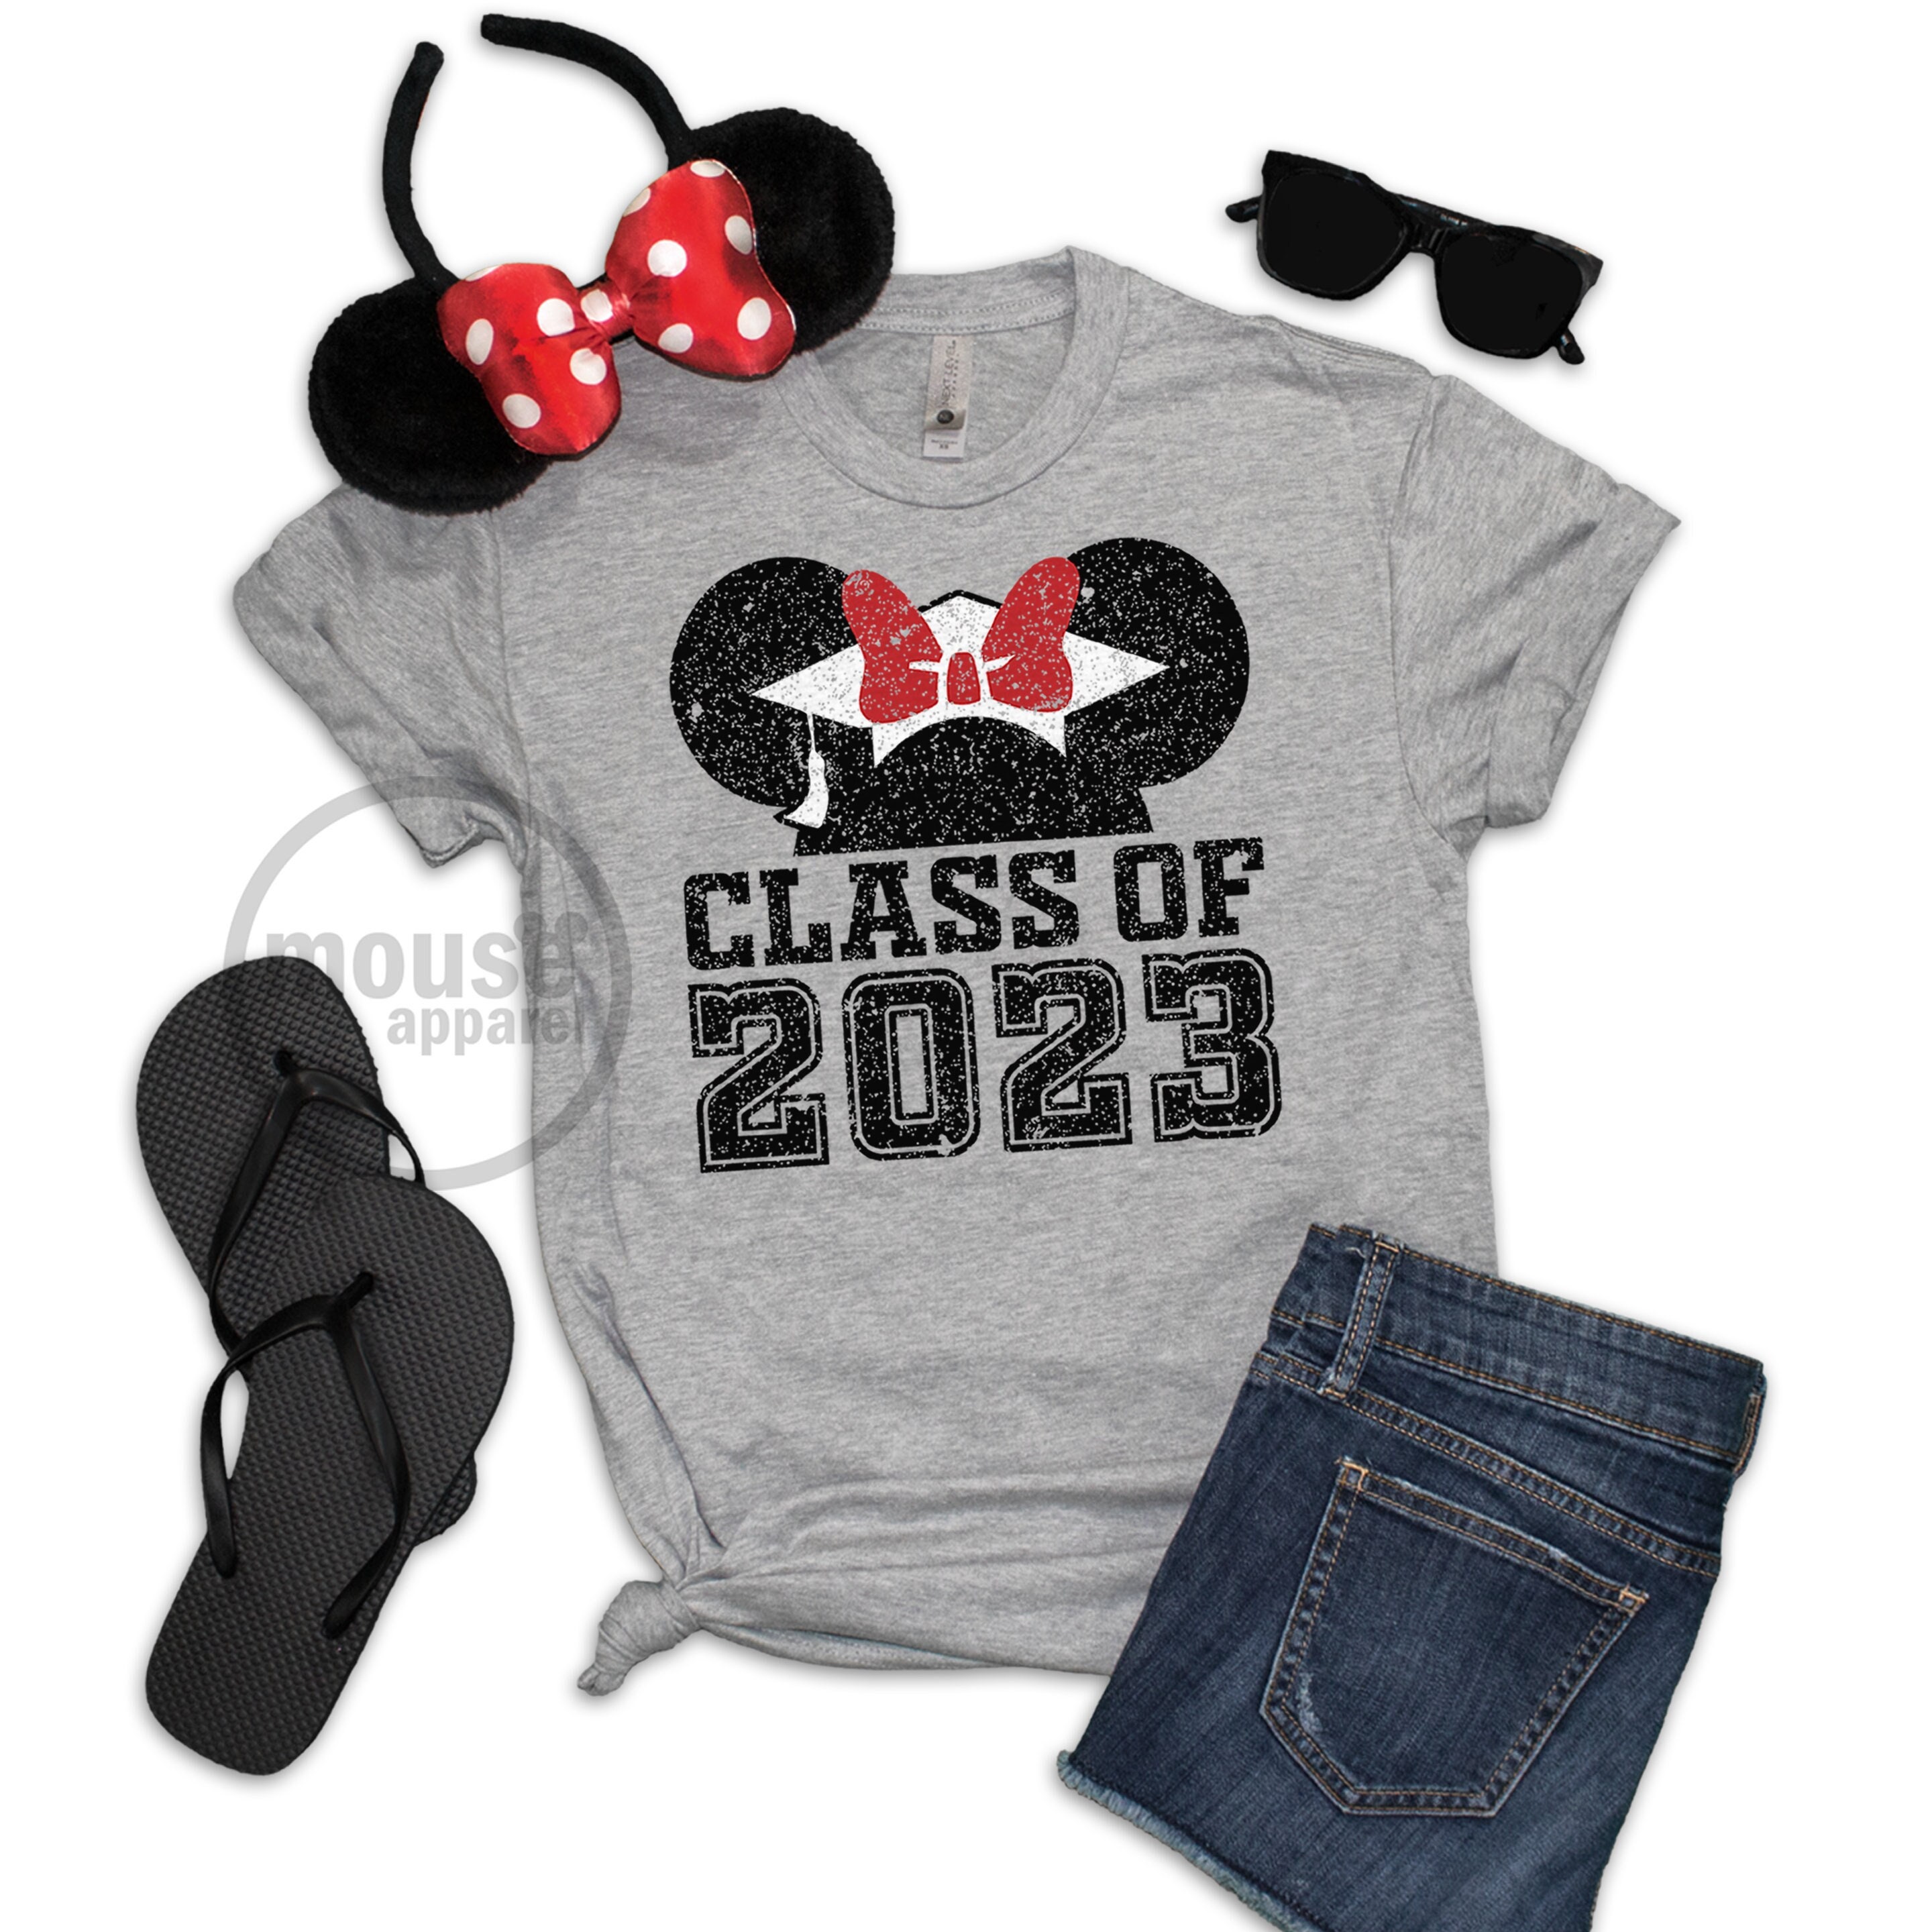 Graduation Collections - Minnie Muse